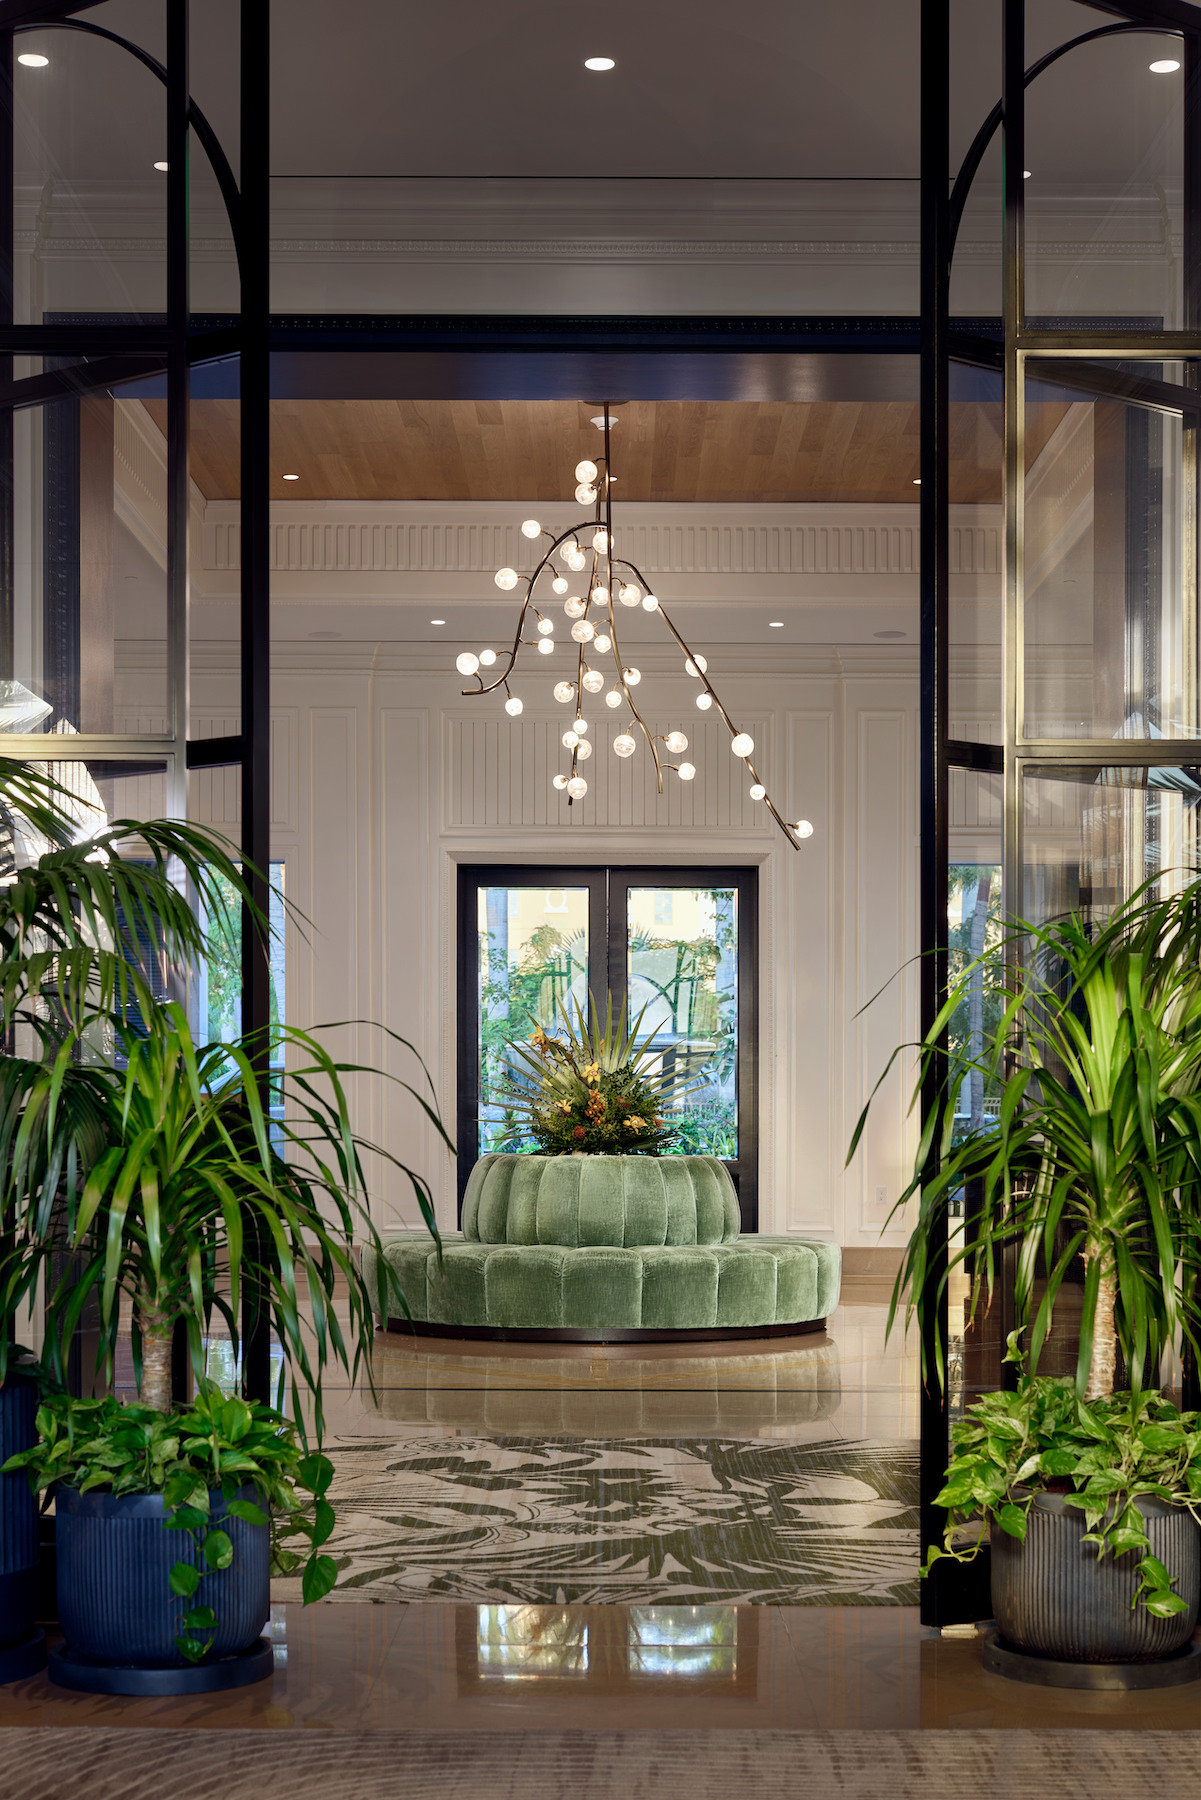 The lush interiors of the Ritz Carlton, Grand Cayman designed by Alexandra Champalimaud in Effect Magazine